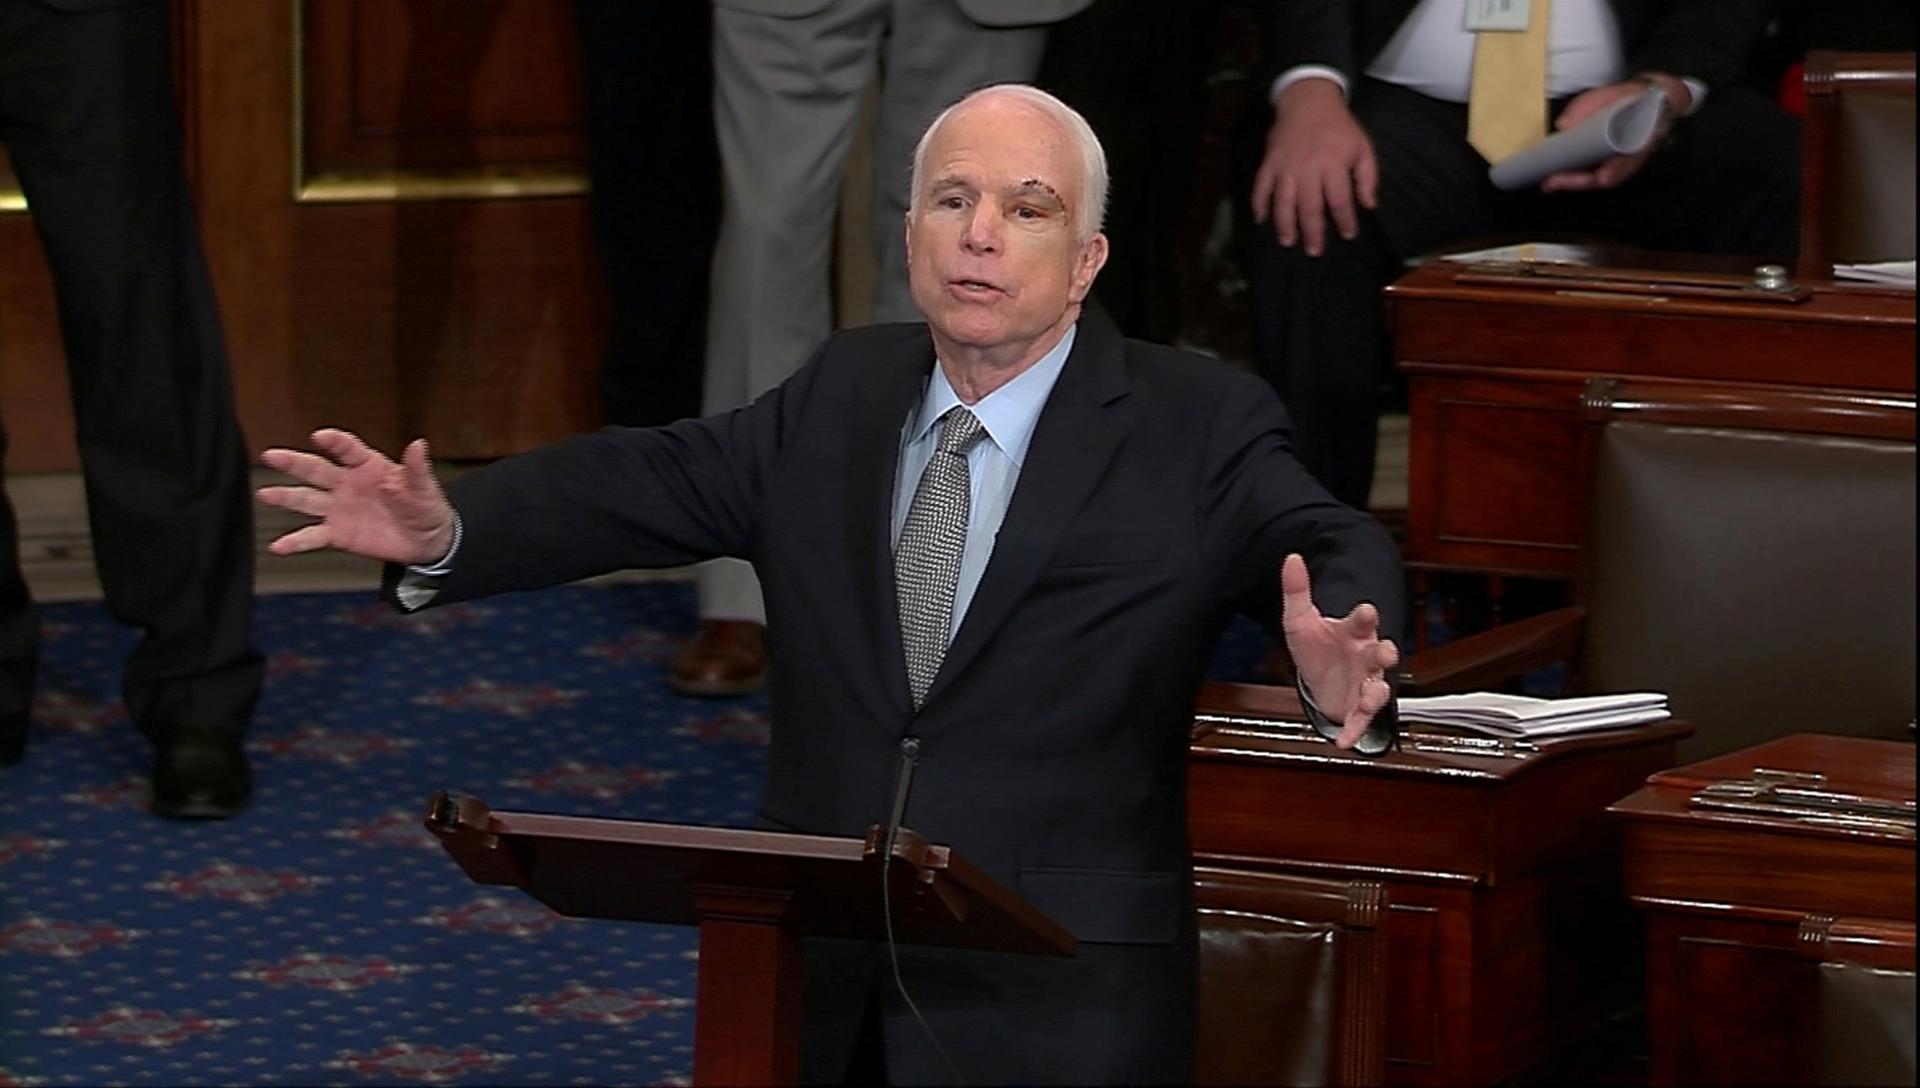 Arizonia Republican Sen. John McCain speaking on the floor of the U.S. Senate after being diagnosed with brain cancer.